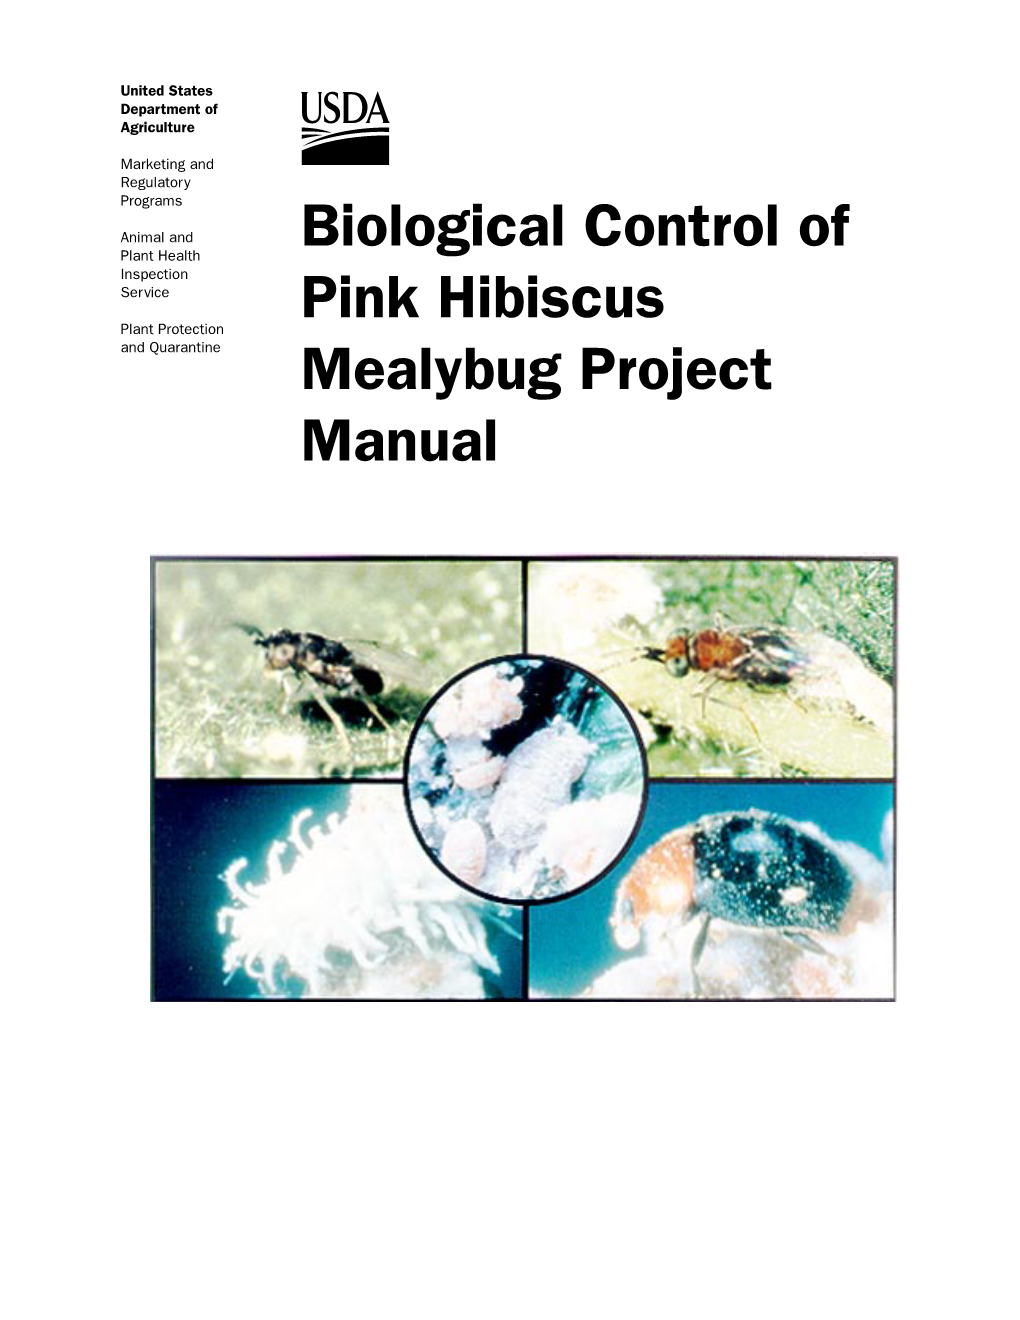 Biological Control of Pink Hibiscus Mealybug Project Manual